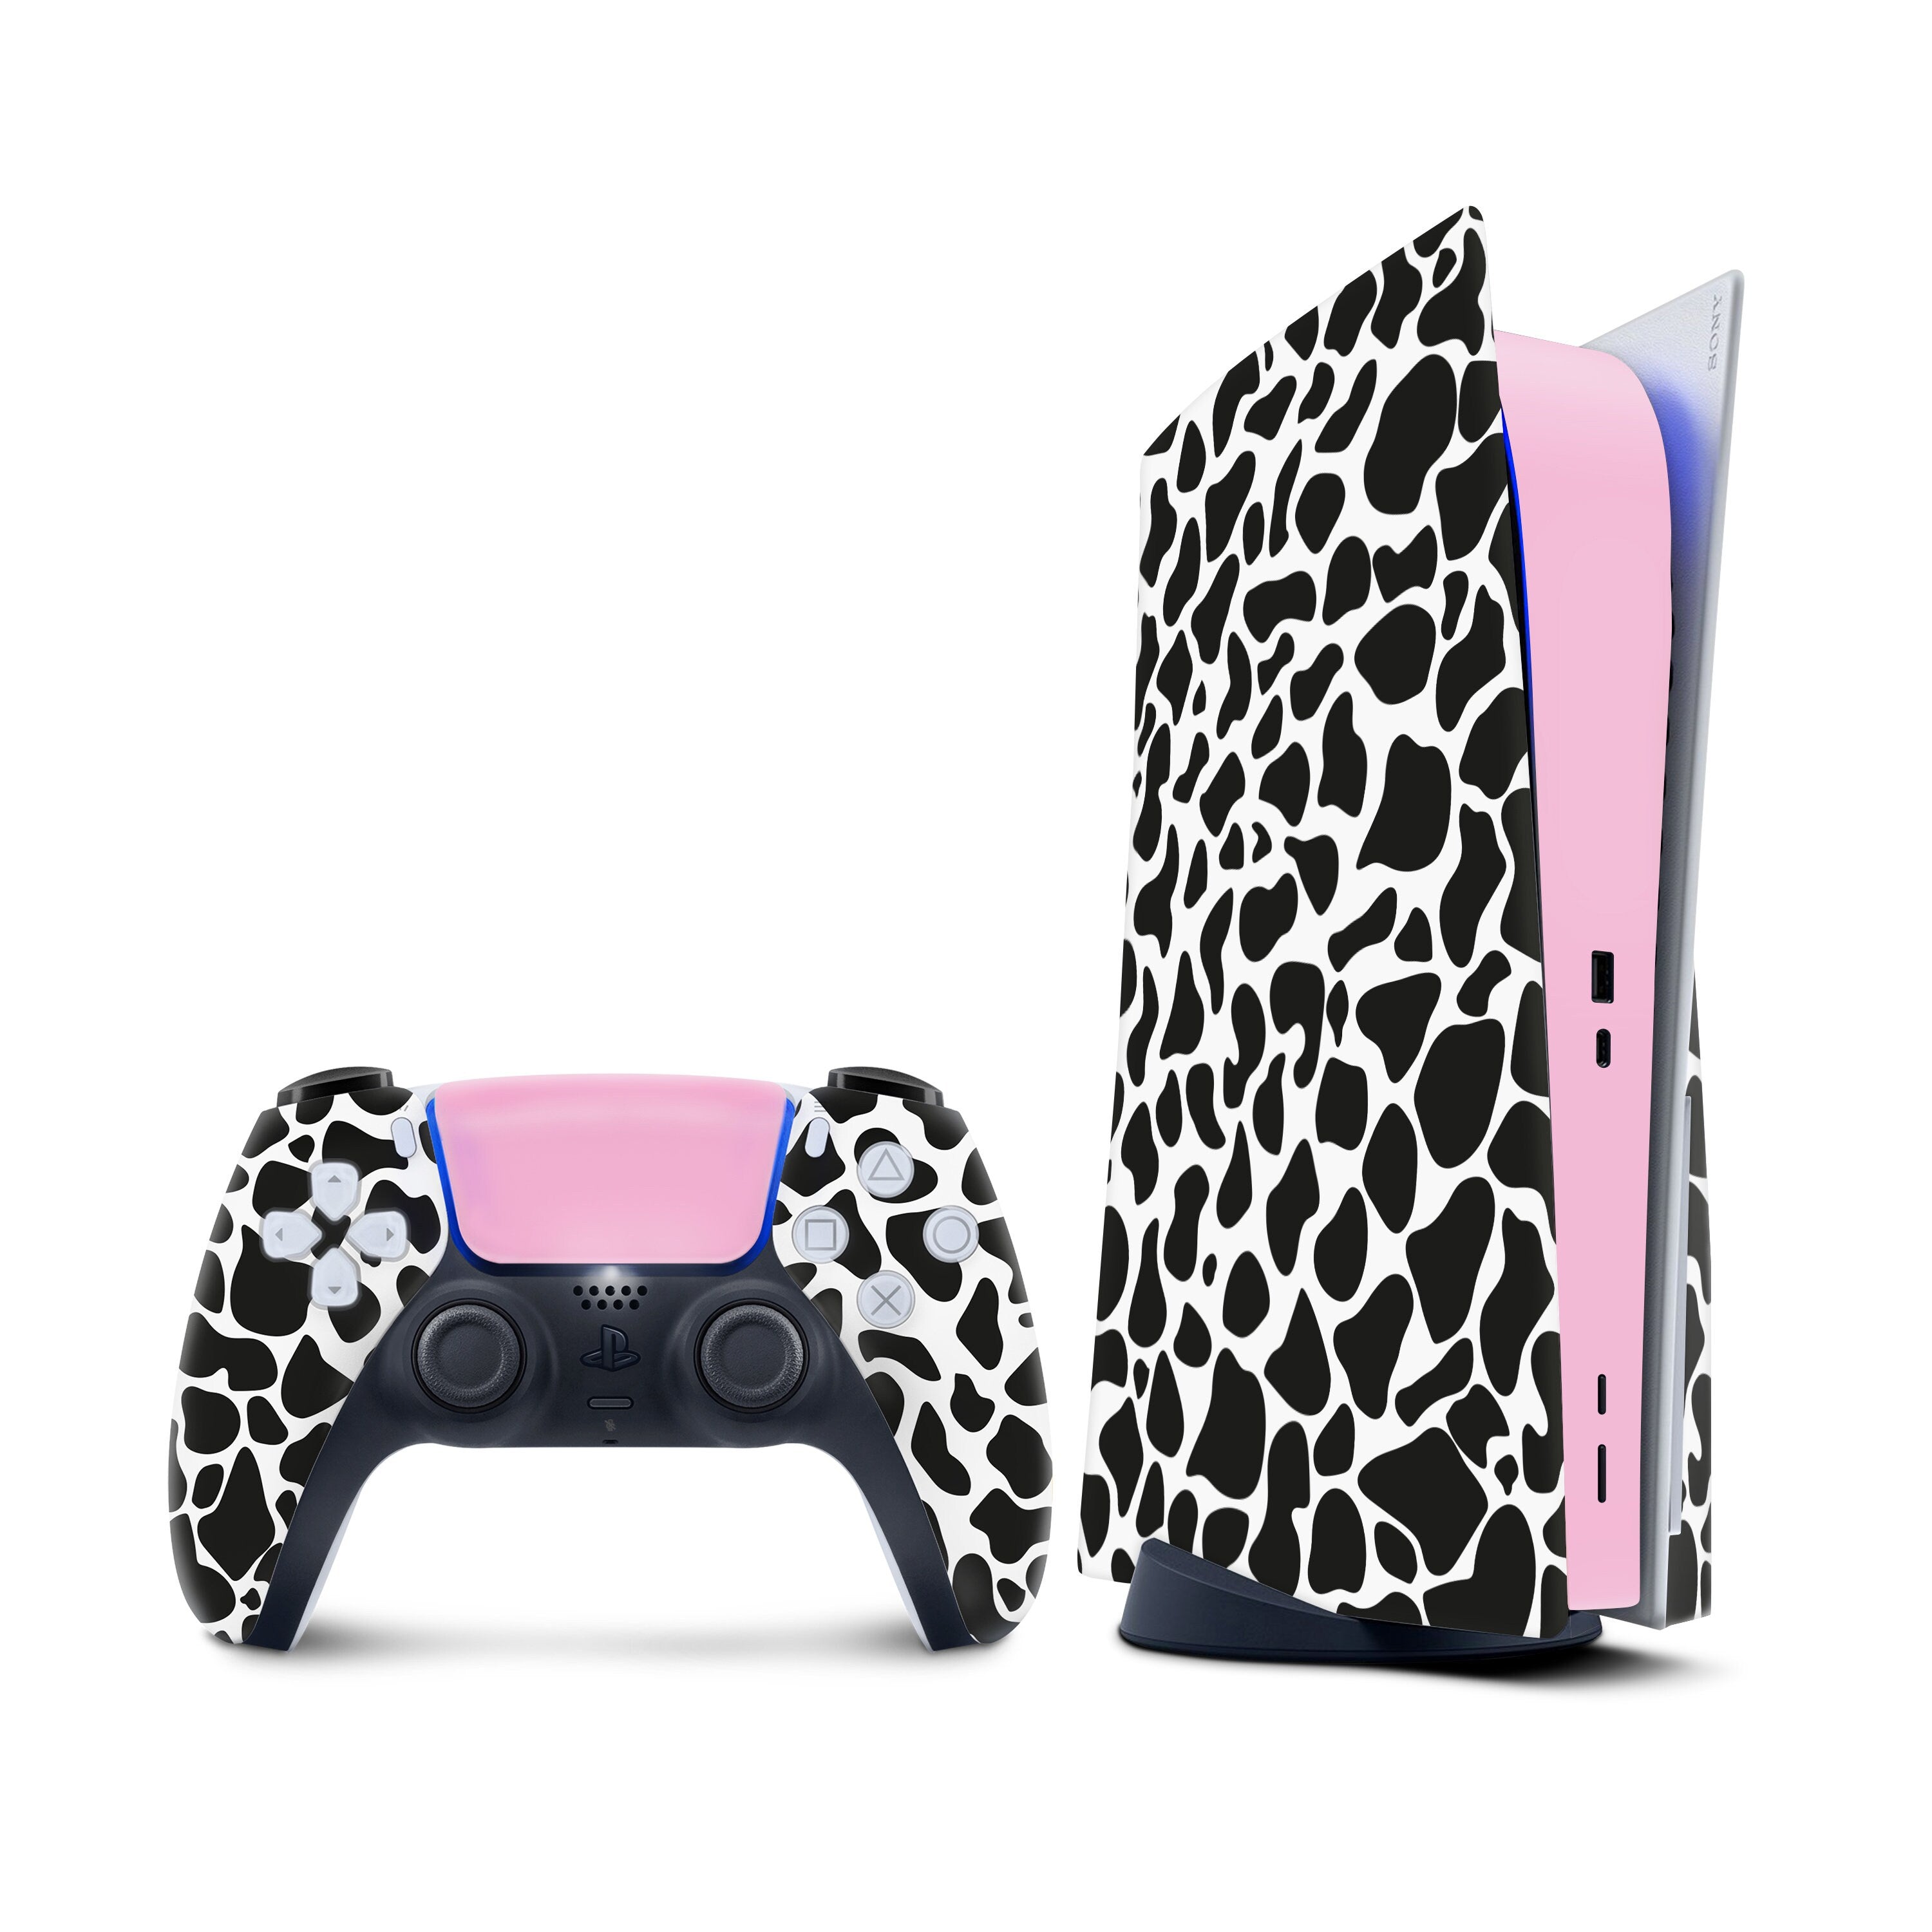 PlayStation 5 Skin // Black and Gold Dots// Best Selling Vinyl Decal  Sticker 3M Vinyl // Full Coverage PS5 Console and Controller Skin Decal